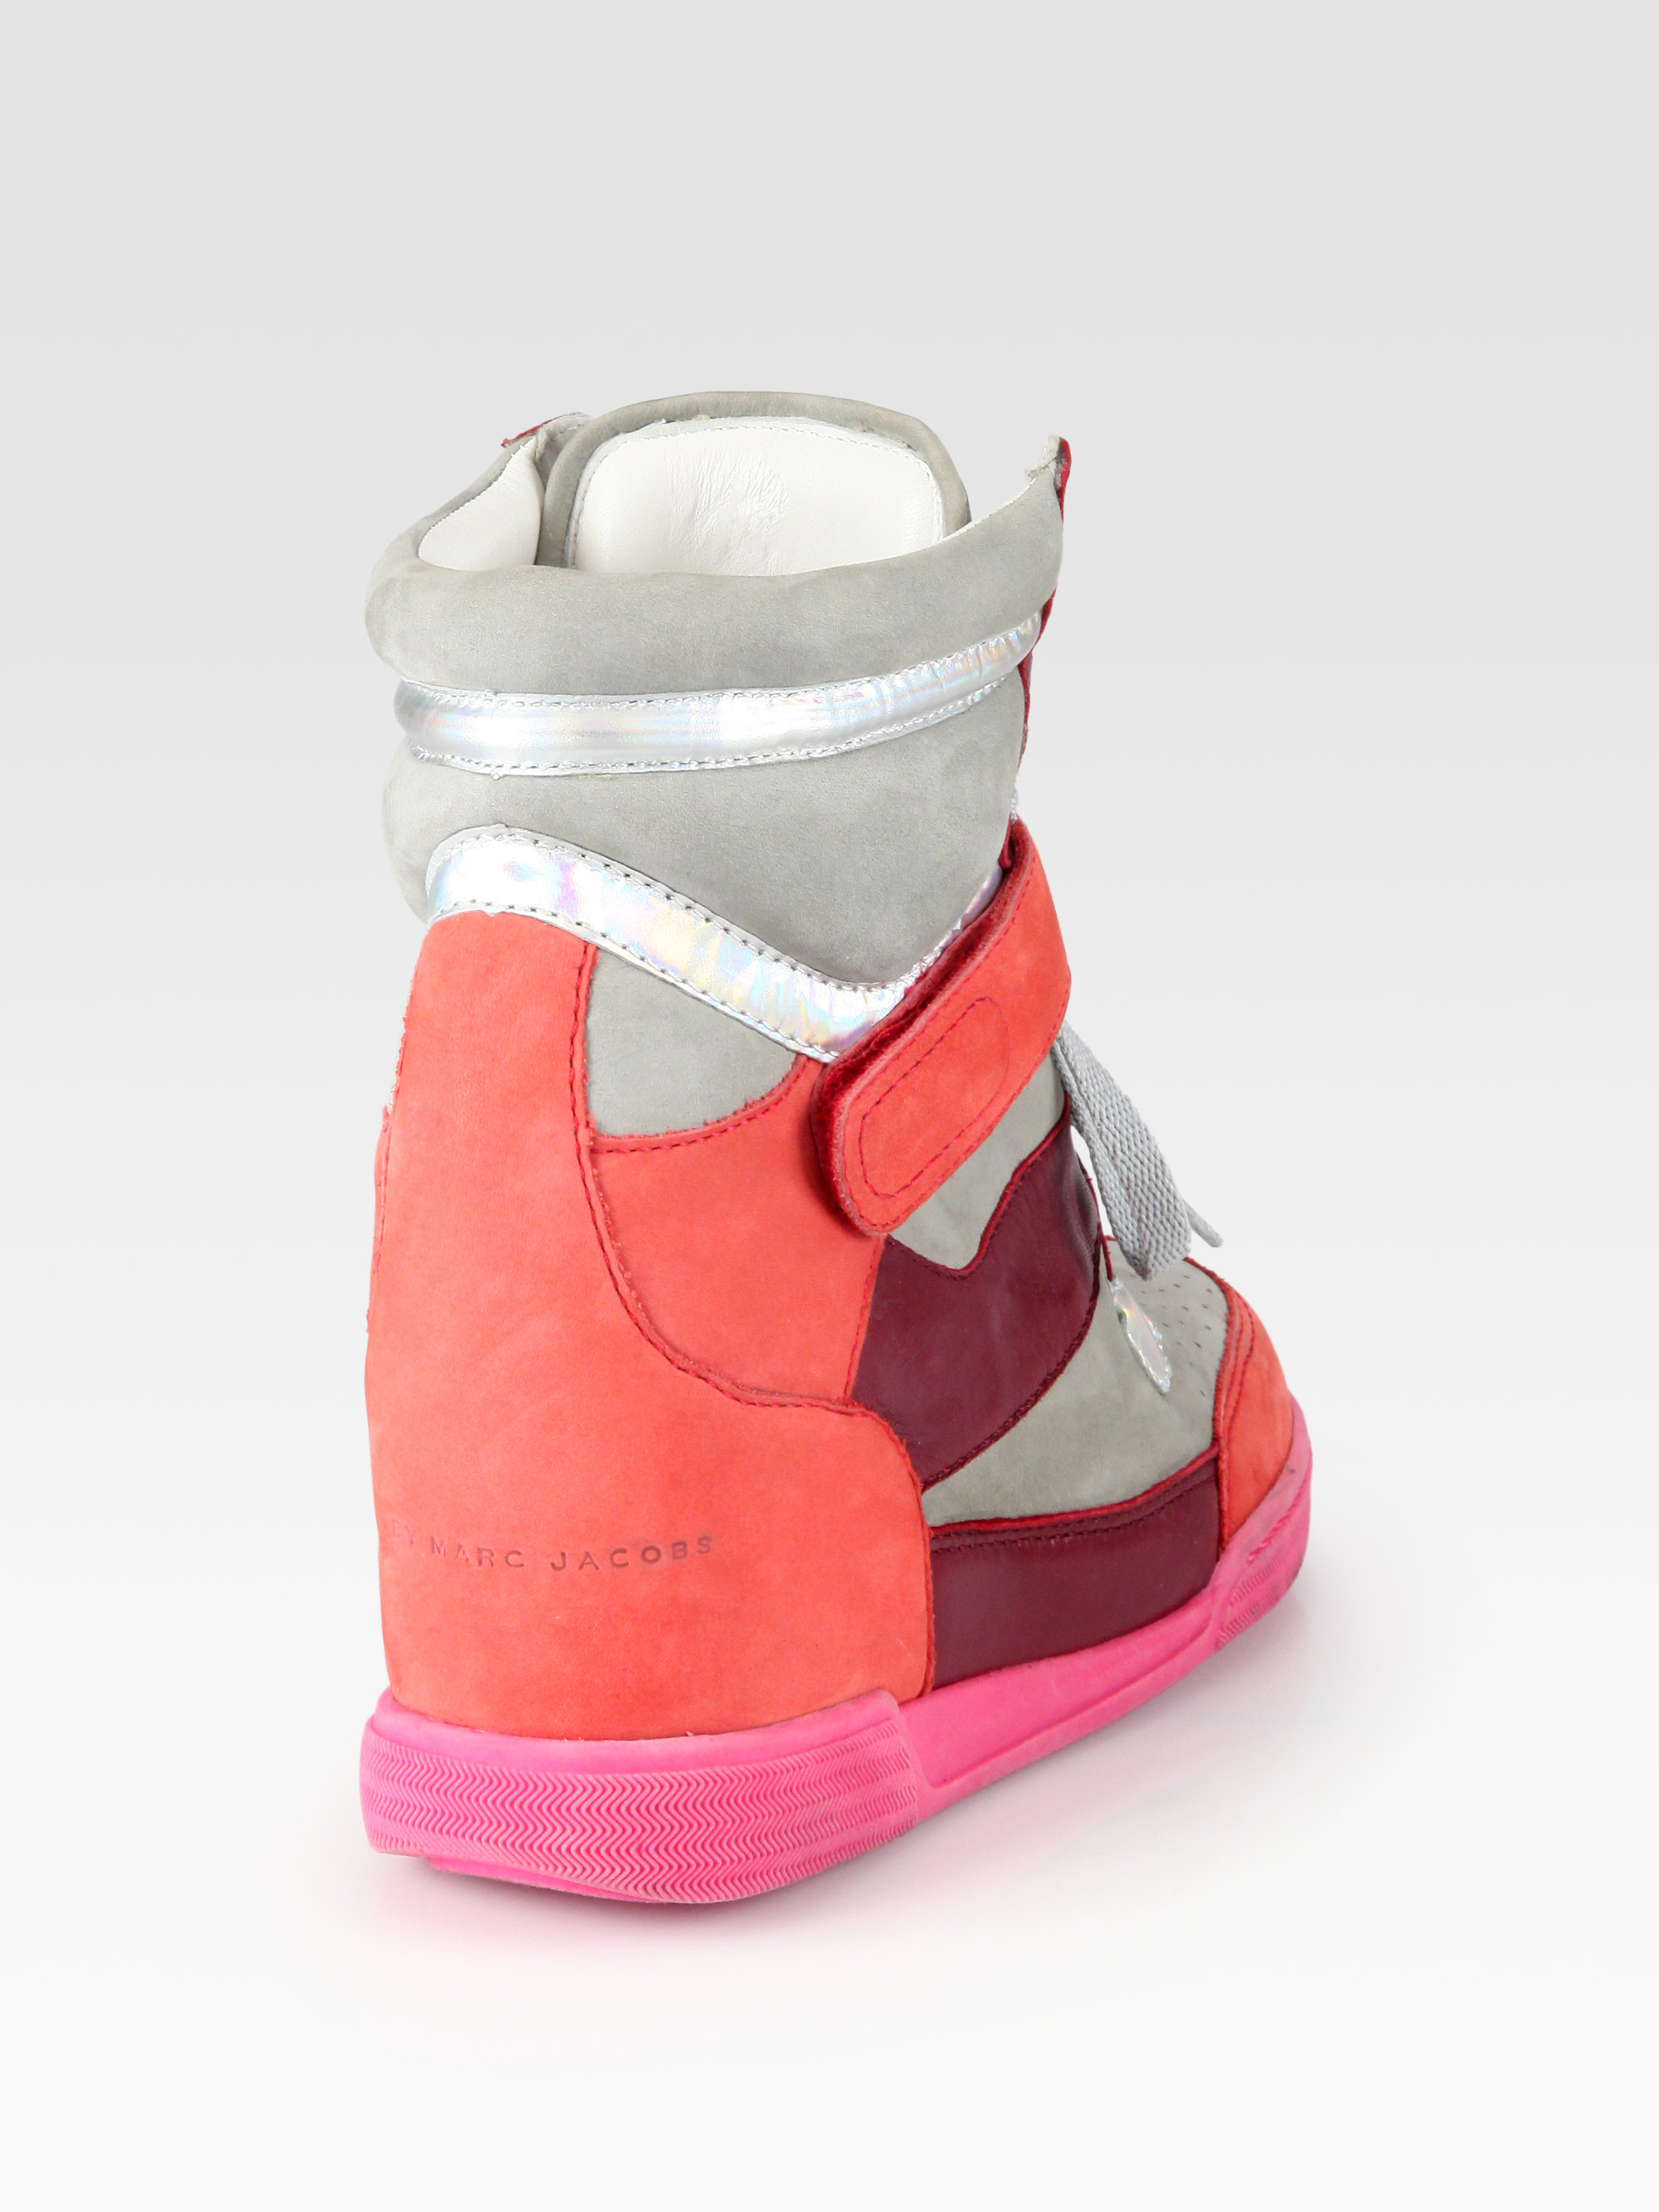 Lyst - Marc by marc jacobs Wedge Trainer in Pink